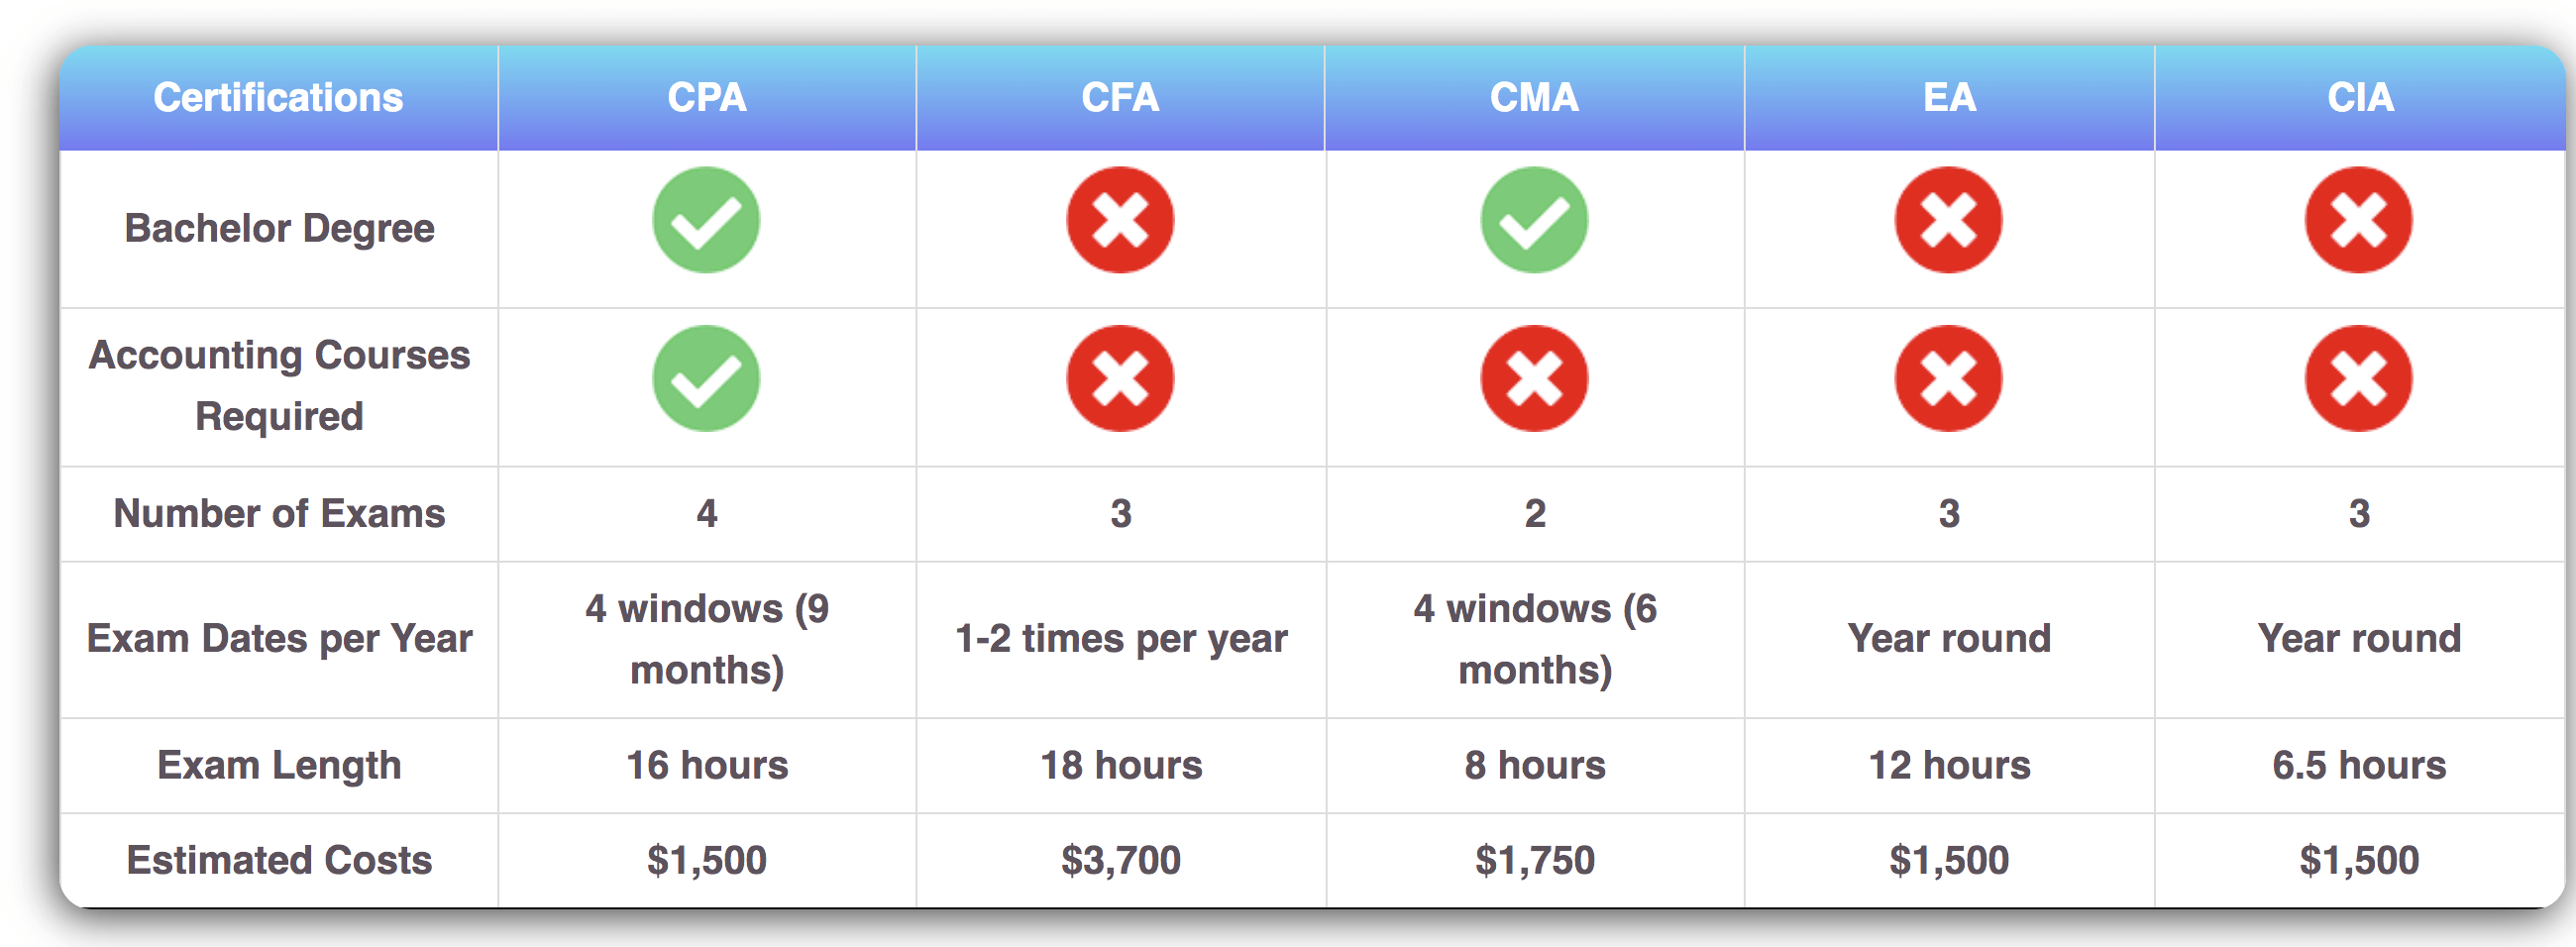 Comparison Chart Of The Top 5 Accounting Certifications